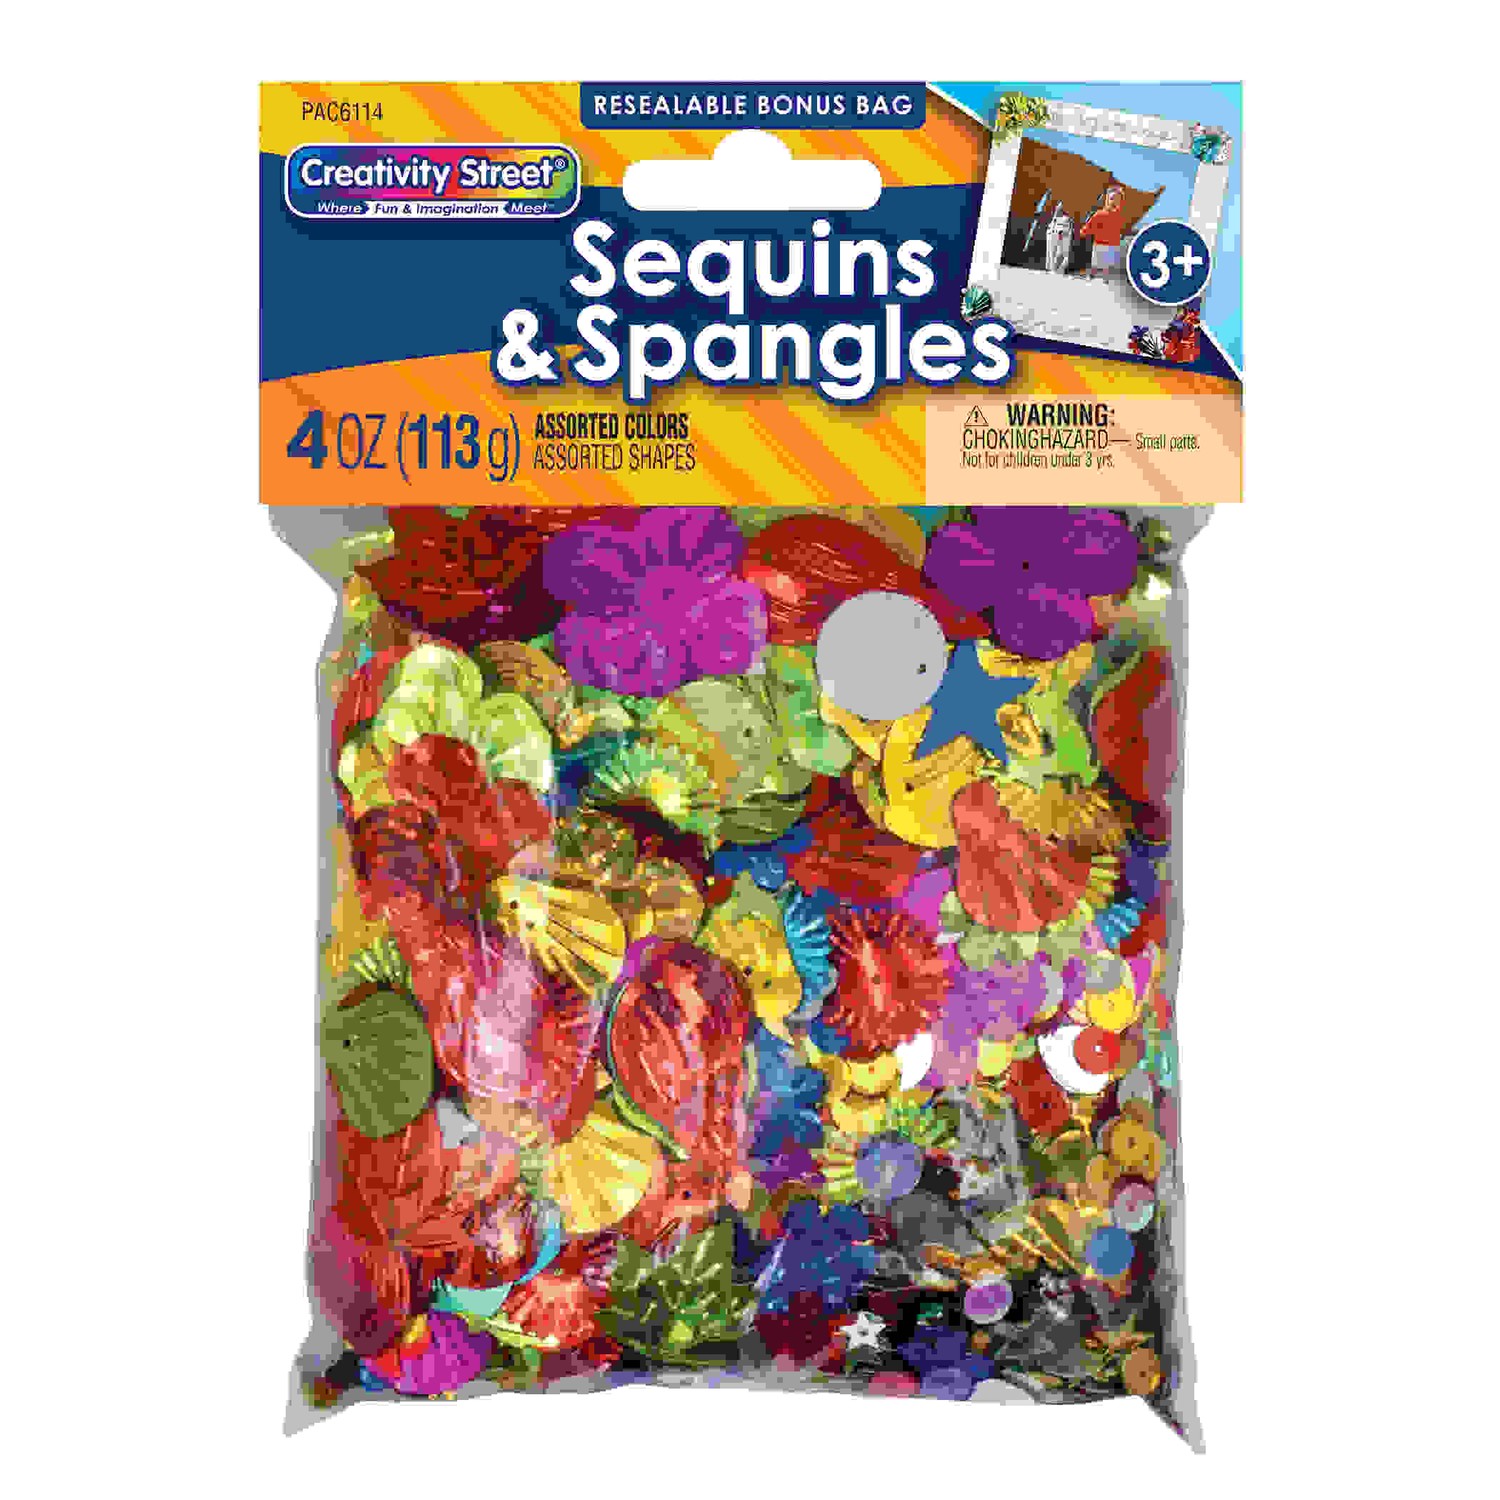 Sequins & Spangles, Assorted Colors, Assorted Sizes, 4 oz